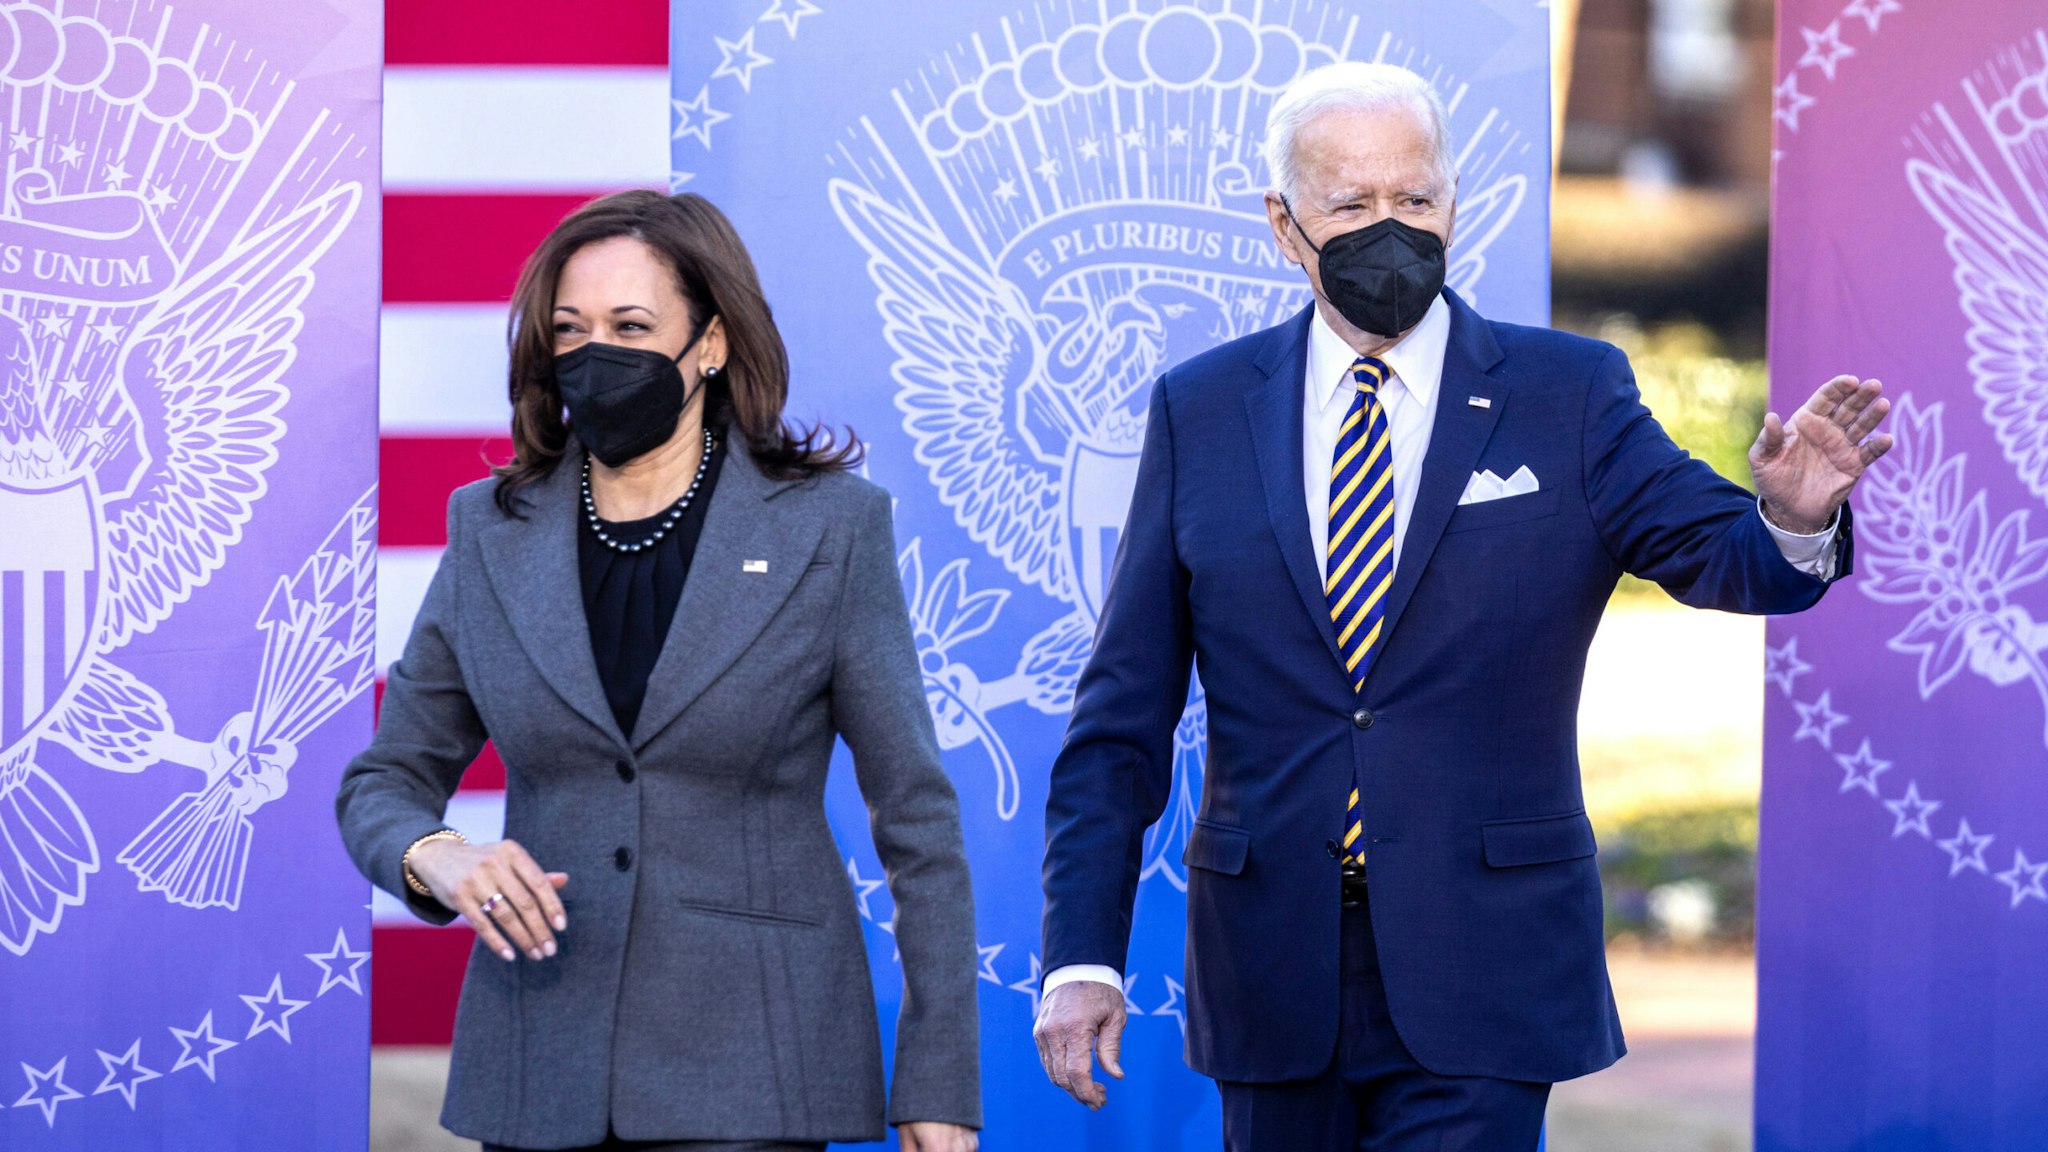 U.S. President Joe Biden and Vice President Kamala Harris arrive to deliver remarks at the Atlanta University Center Consortium in Atlanta, Georgia, U.S., on Tuesday, Jan. 11, 2022. Biden called on the U.S. Senate to change its rules to allow a simple majority to pass voting rights legislation, saying in Atlanta that GOP-backed state laws threaten democracy.